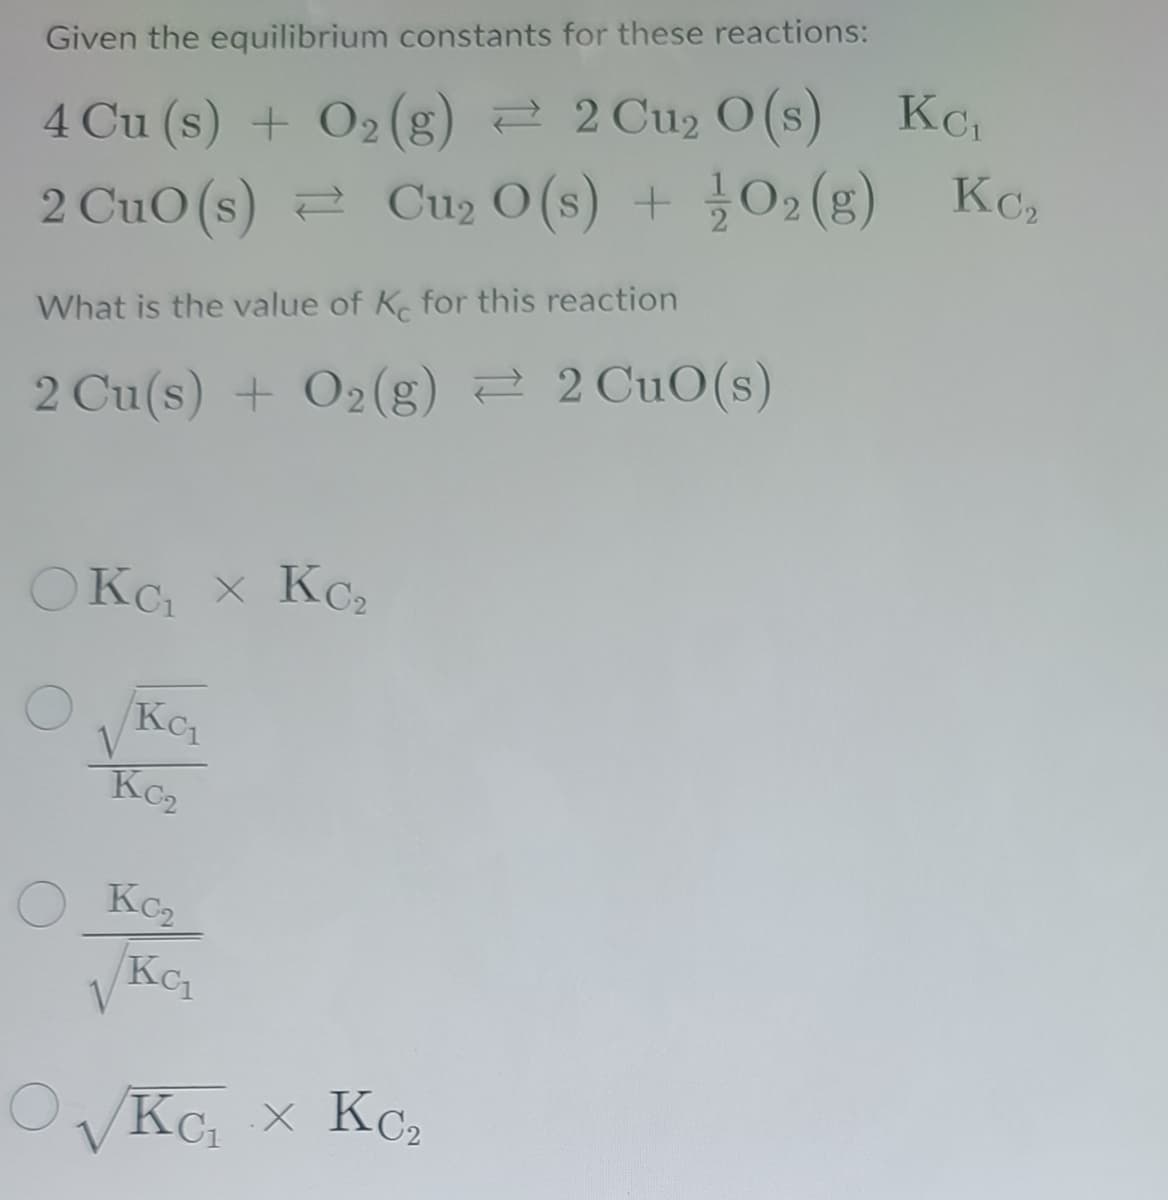 Given the equilibrium constants for these reactions:
KCi
4 Cu (s) + O2(g) 2 2 Cu2 O (s)
KC2
2 CuO (s) 2 Cu2 O (s) + 02 (g) Kc,
What is the value of K for this reaction
2 Cu(s) + O2(g) 2 2 CuO(s)
OKC x KC2
Kc
Kc2
Kc2
KC
V
KC x KC
